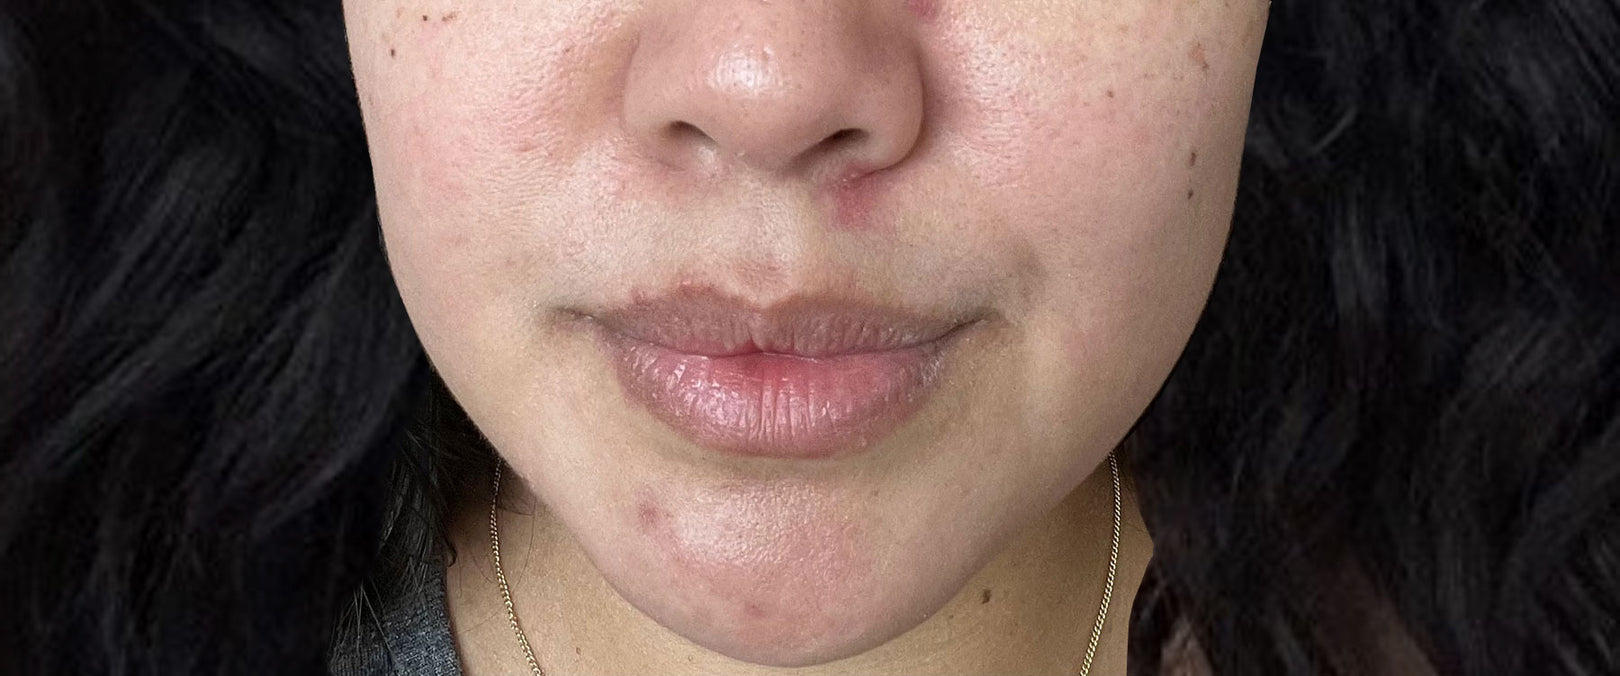 Image of woman with blemishes before using Plantkos products